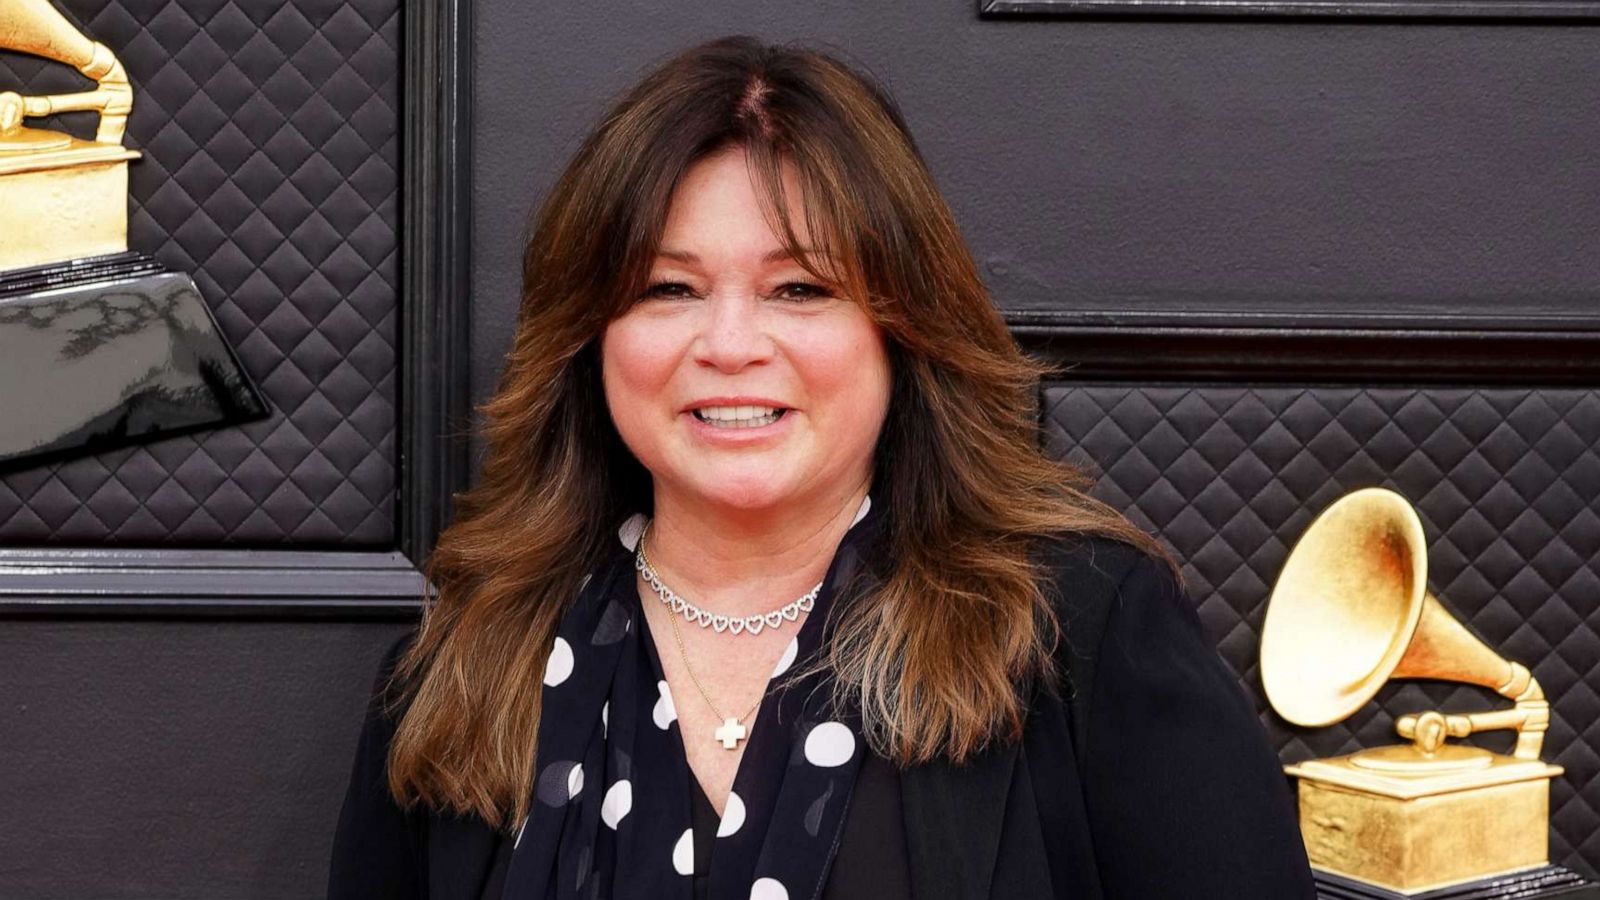 Valerie Bertinelli says ditching the scale 'immensely' improved her mental health Morning America